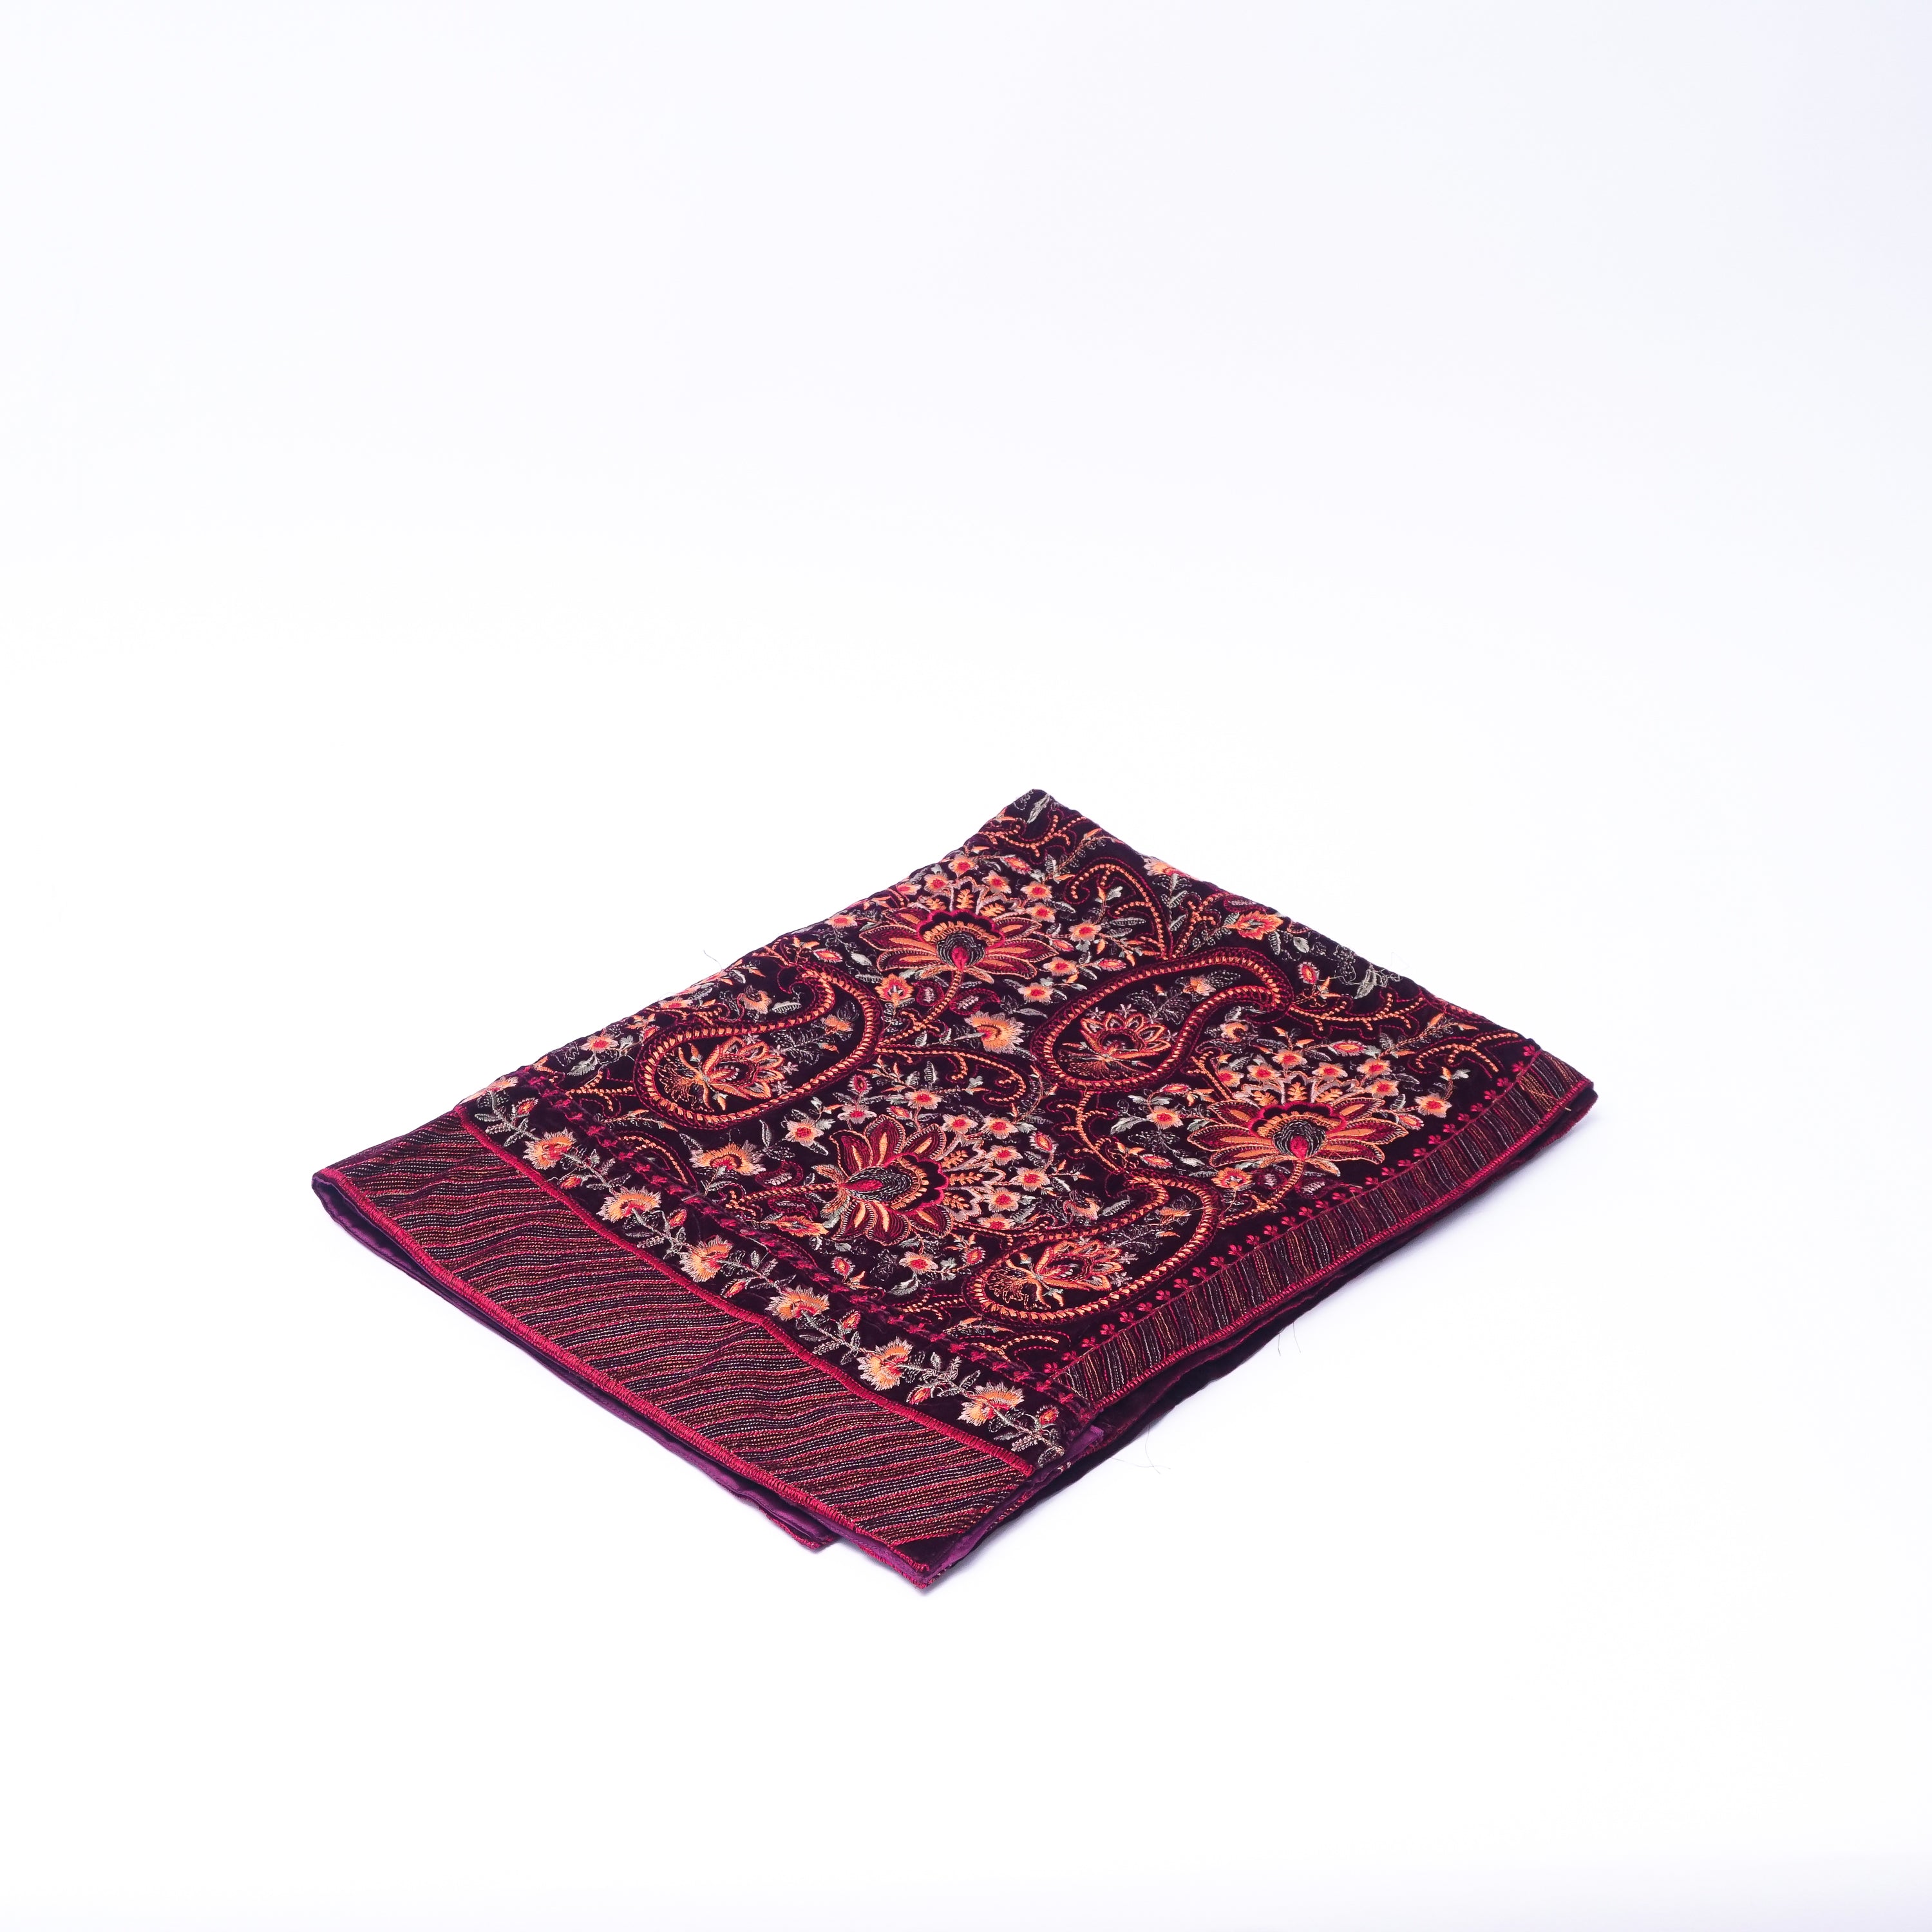 Maroon Velvet Staller with Intricate Heavy Embroidery: Elegance and Warmth